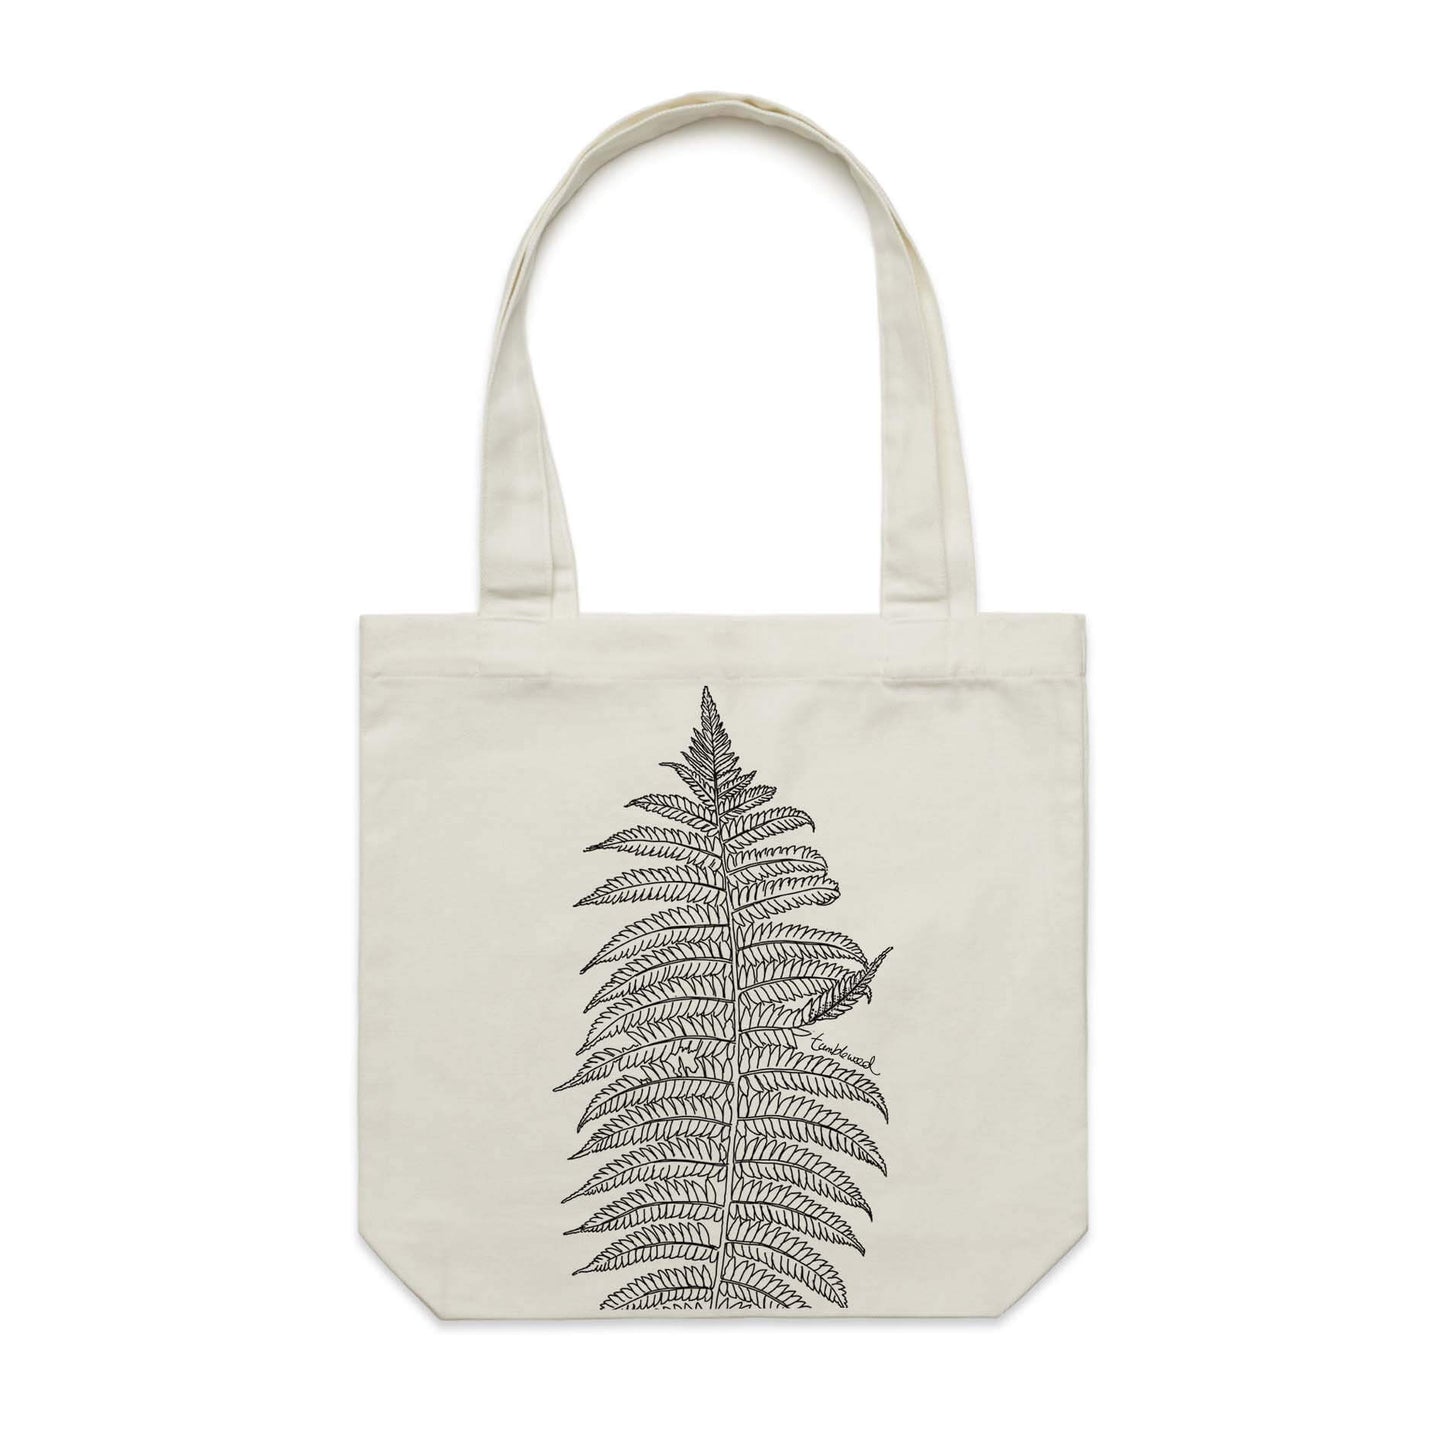 Cotton canvas tote bag with a screen printed Silver fern/ponga design.